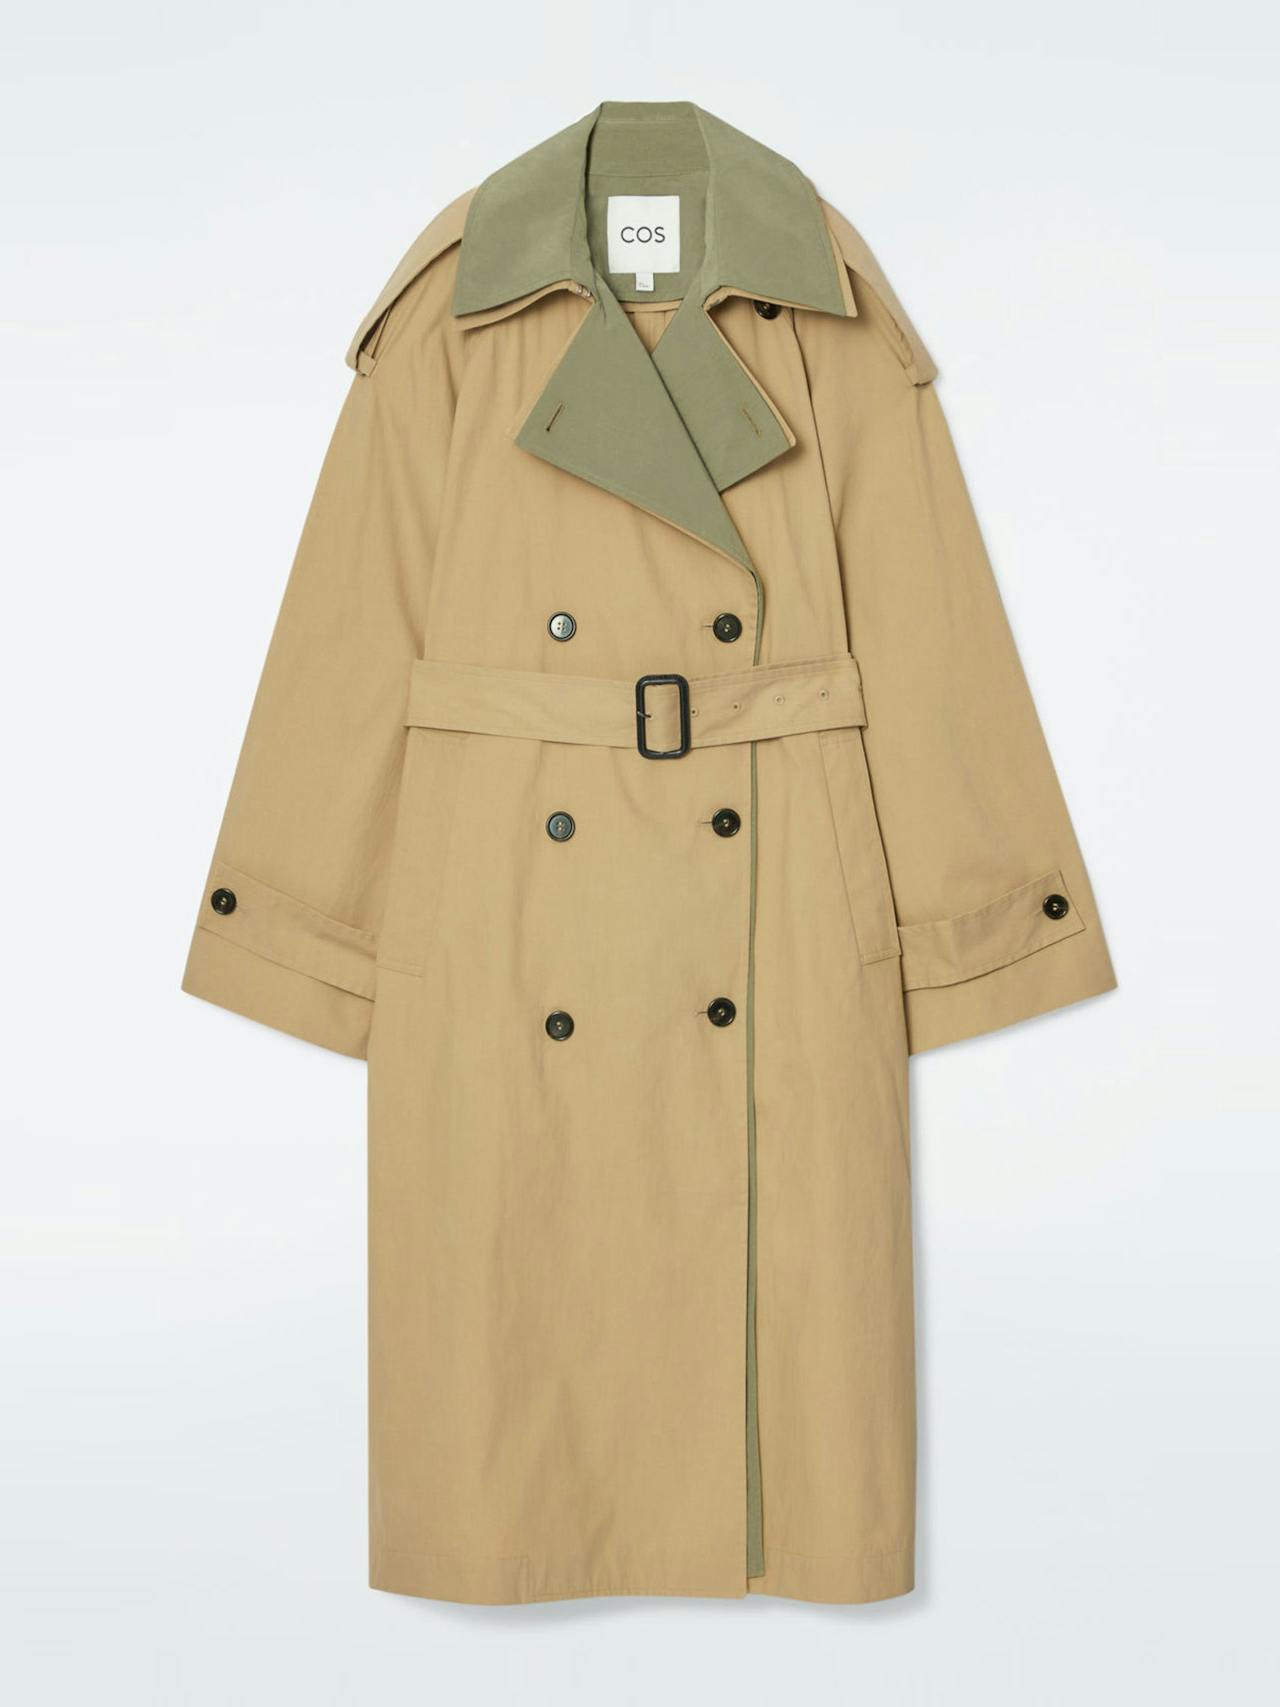 Layered double-breasted trench coat